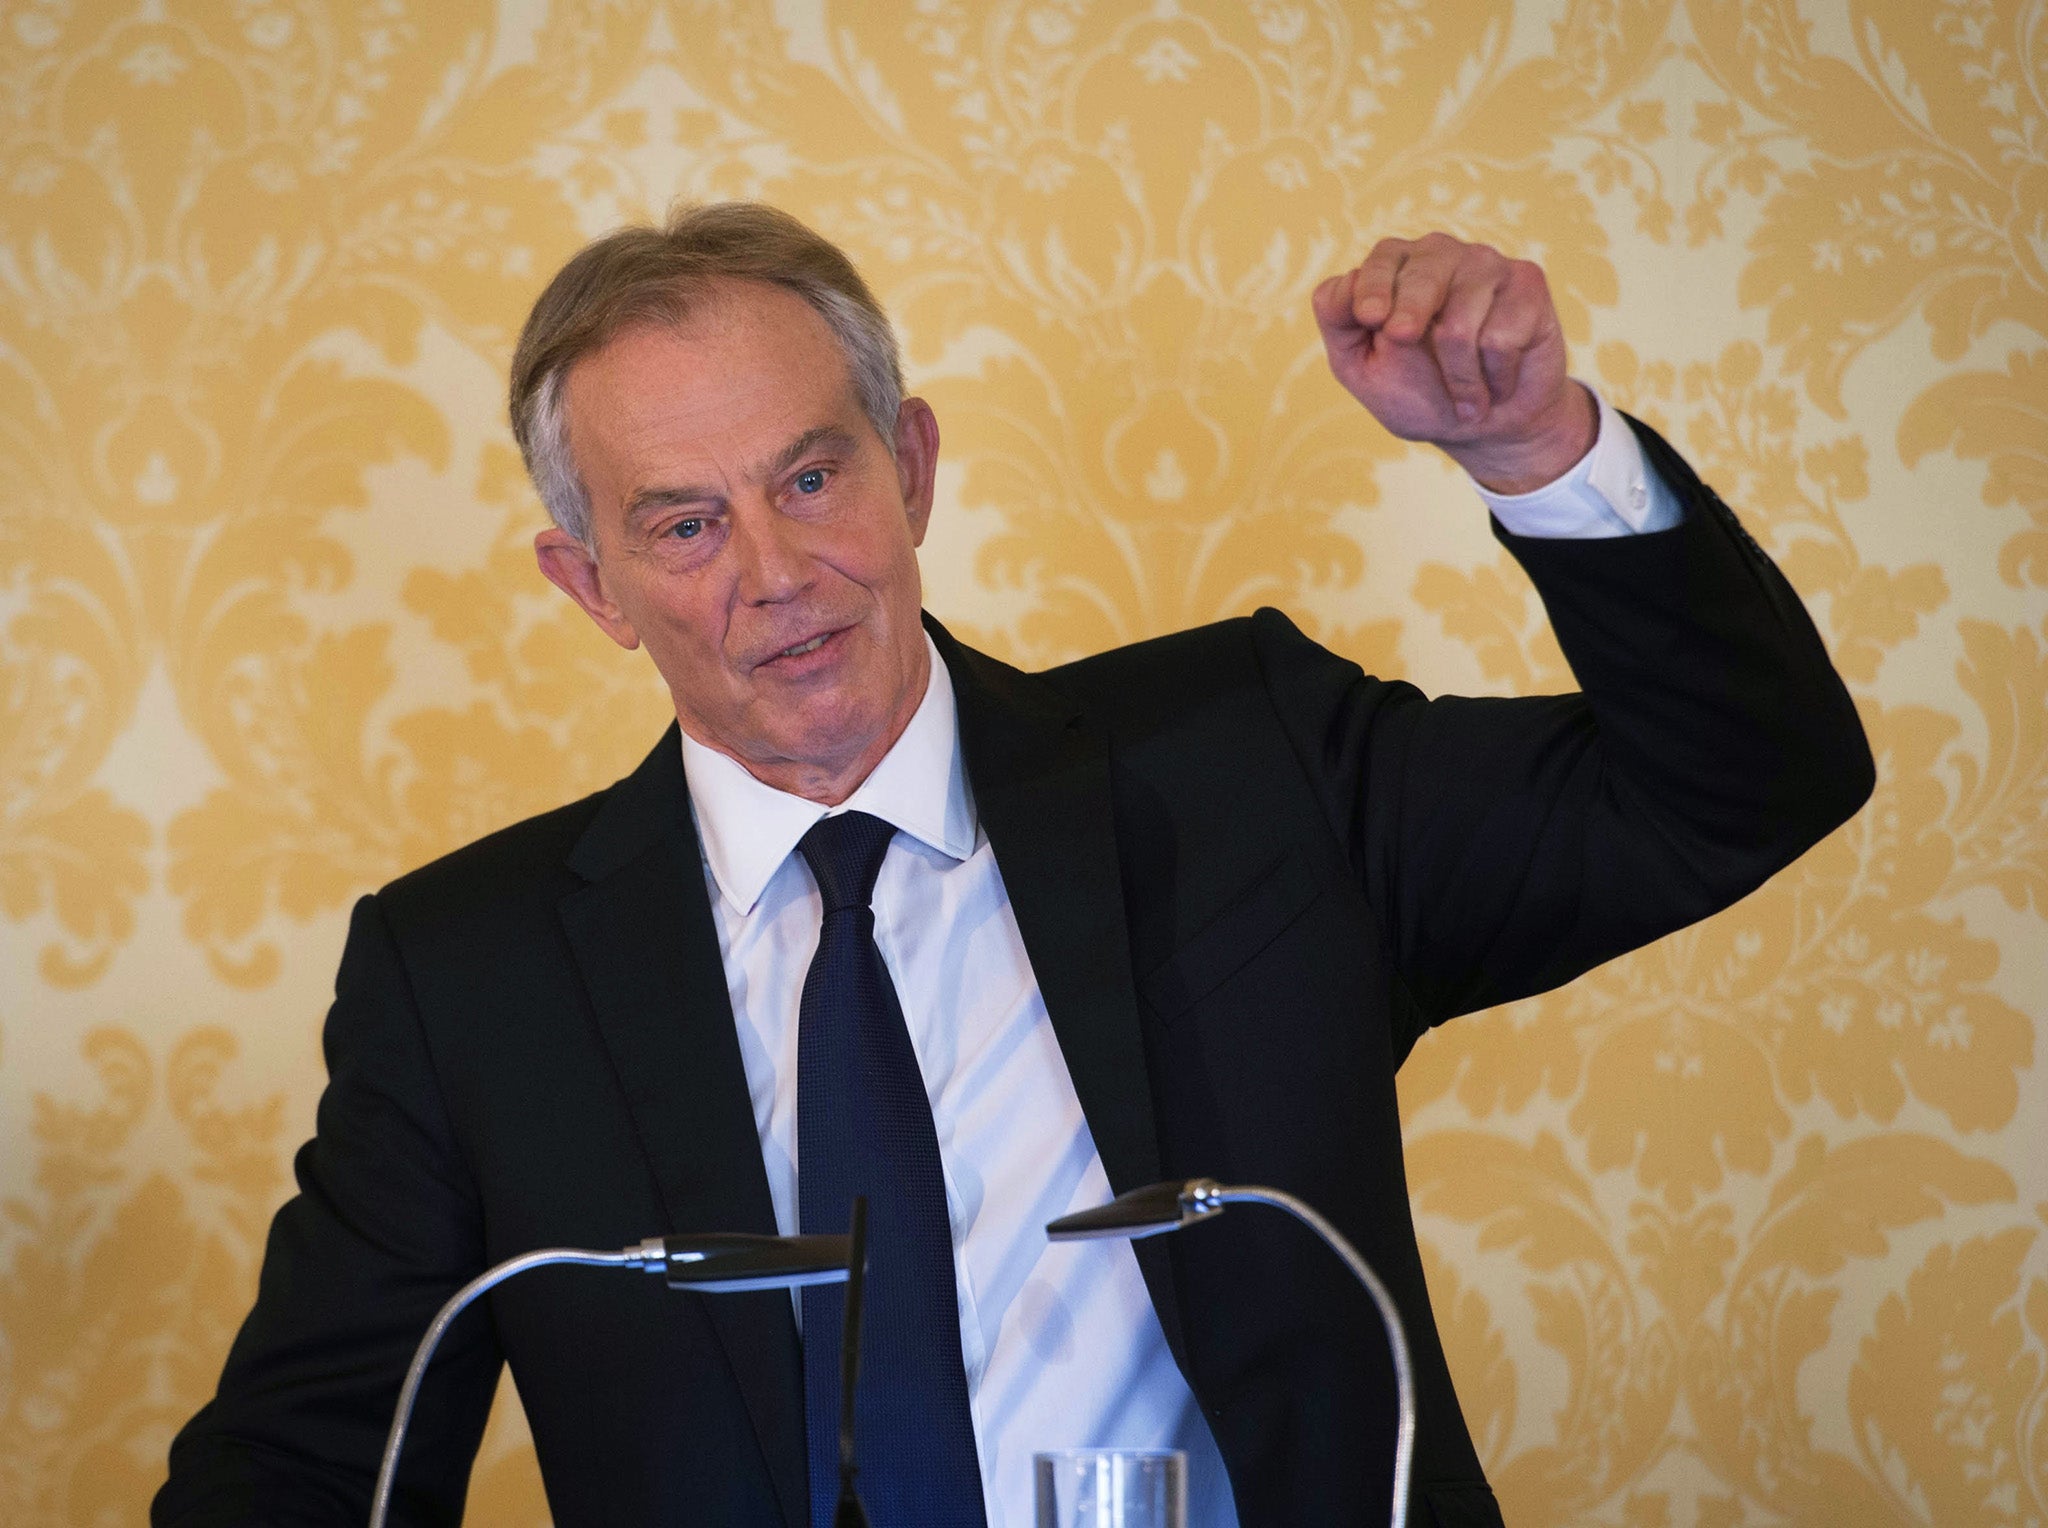 Tony Blair served as UK Prime Minister from 1997 to 2007